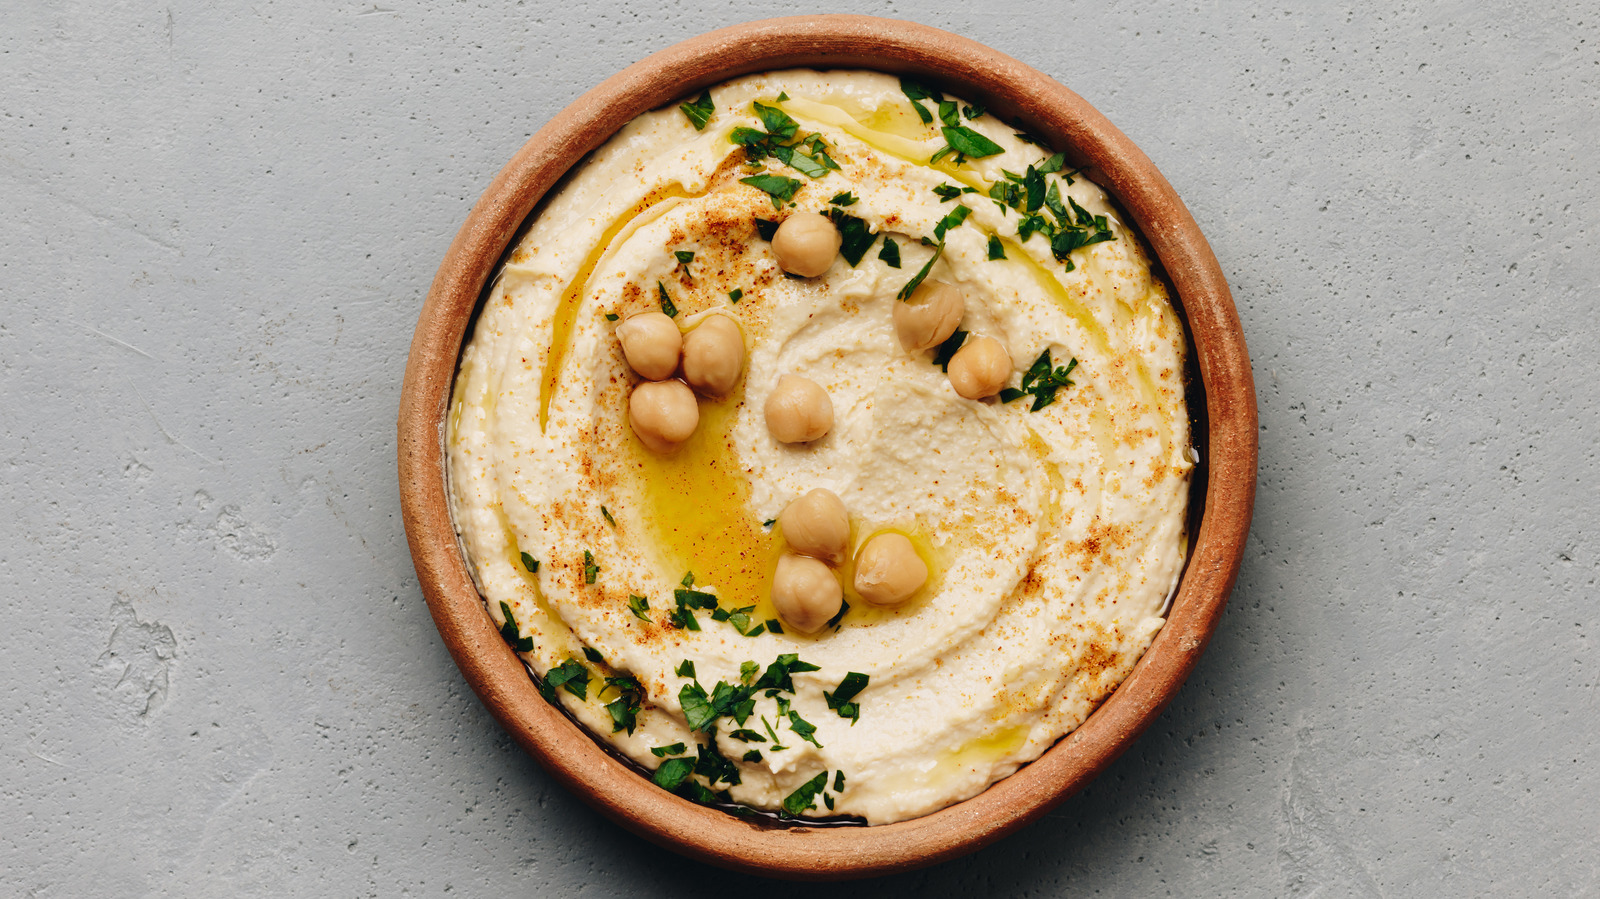 The Best Ingredient To Spice Up StoreBought Hummus